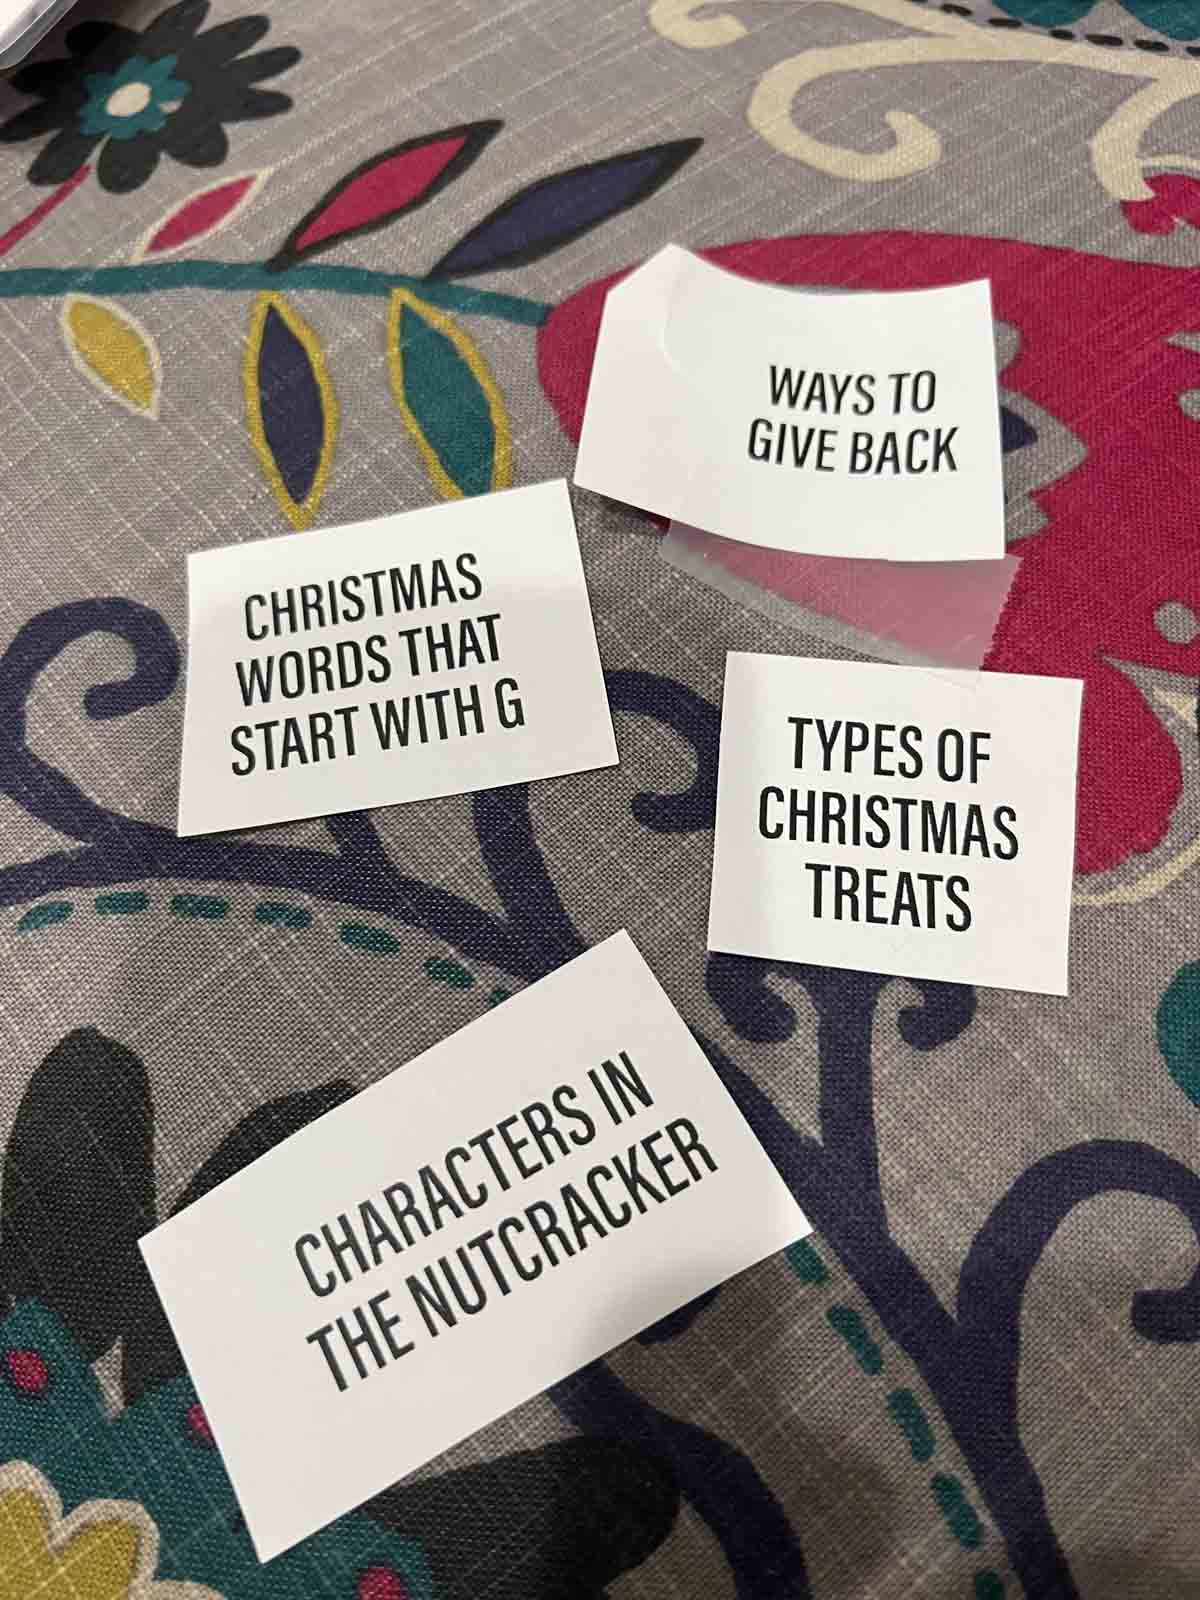 Christmas categories on pieces of white paper